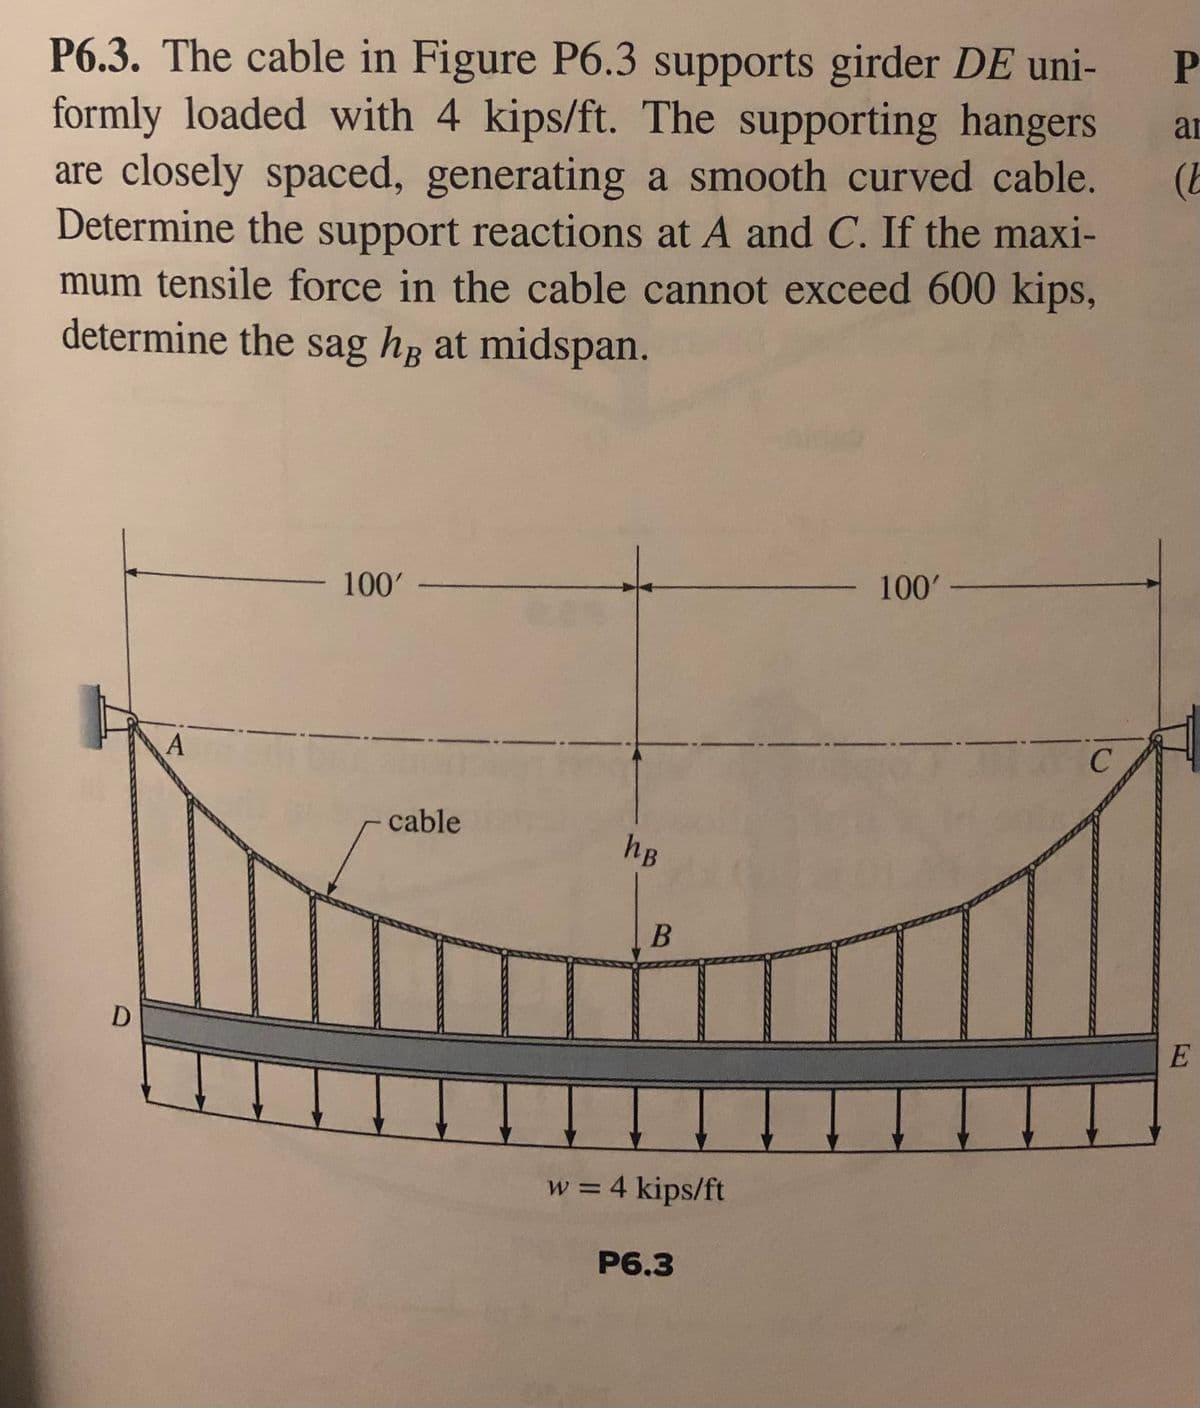 P6.3. The cable in Figure P6.3 supports girder DE uni-
formly loaded with 4 kips/ft. The supporting hangers
are closely spaced, generating a smooth curved cable.
Determine the support reactions at A and C. If the maxi-
mum tensile force in the cable cannot exceed 600 kips,
determine the sag hg at midspan.
ar
100'
100' -
cable
hB
E
w = 4 kips/ft
P6.3
